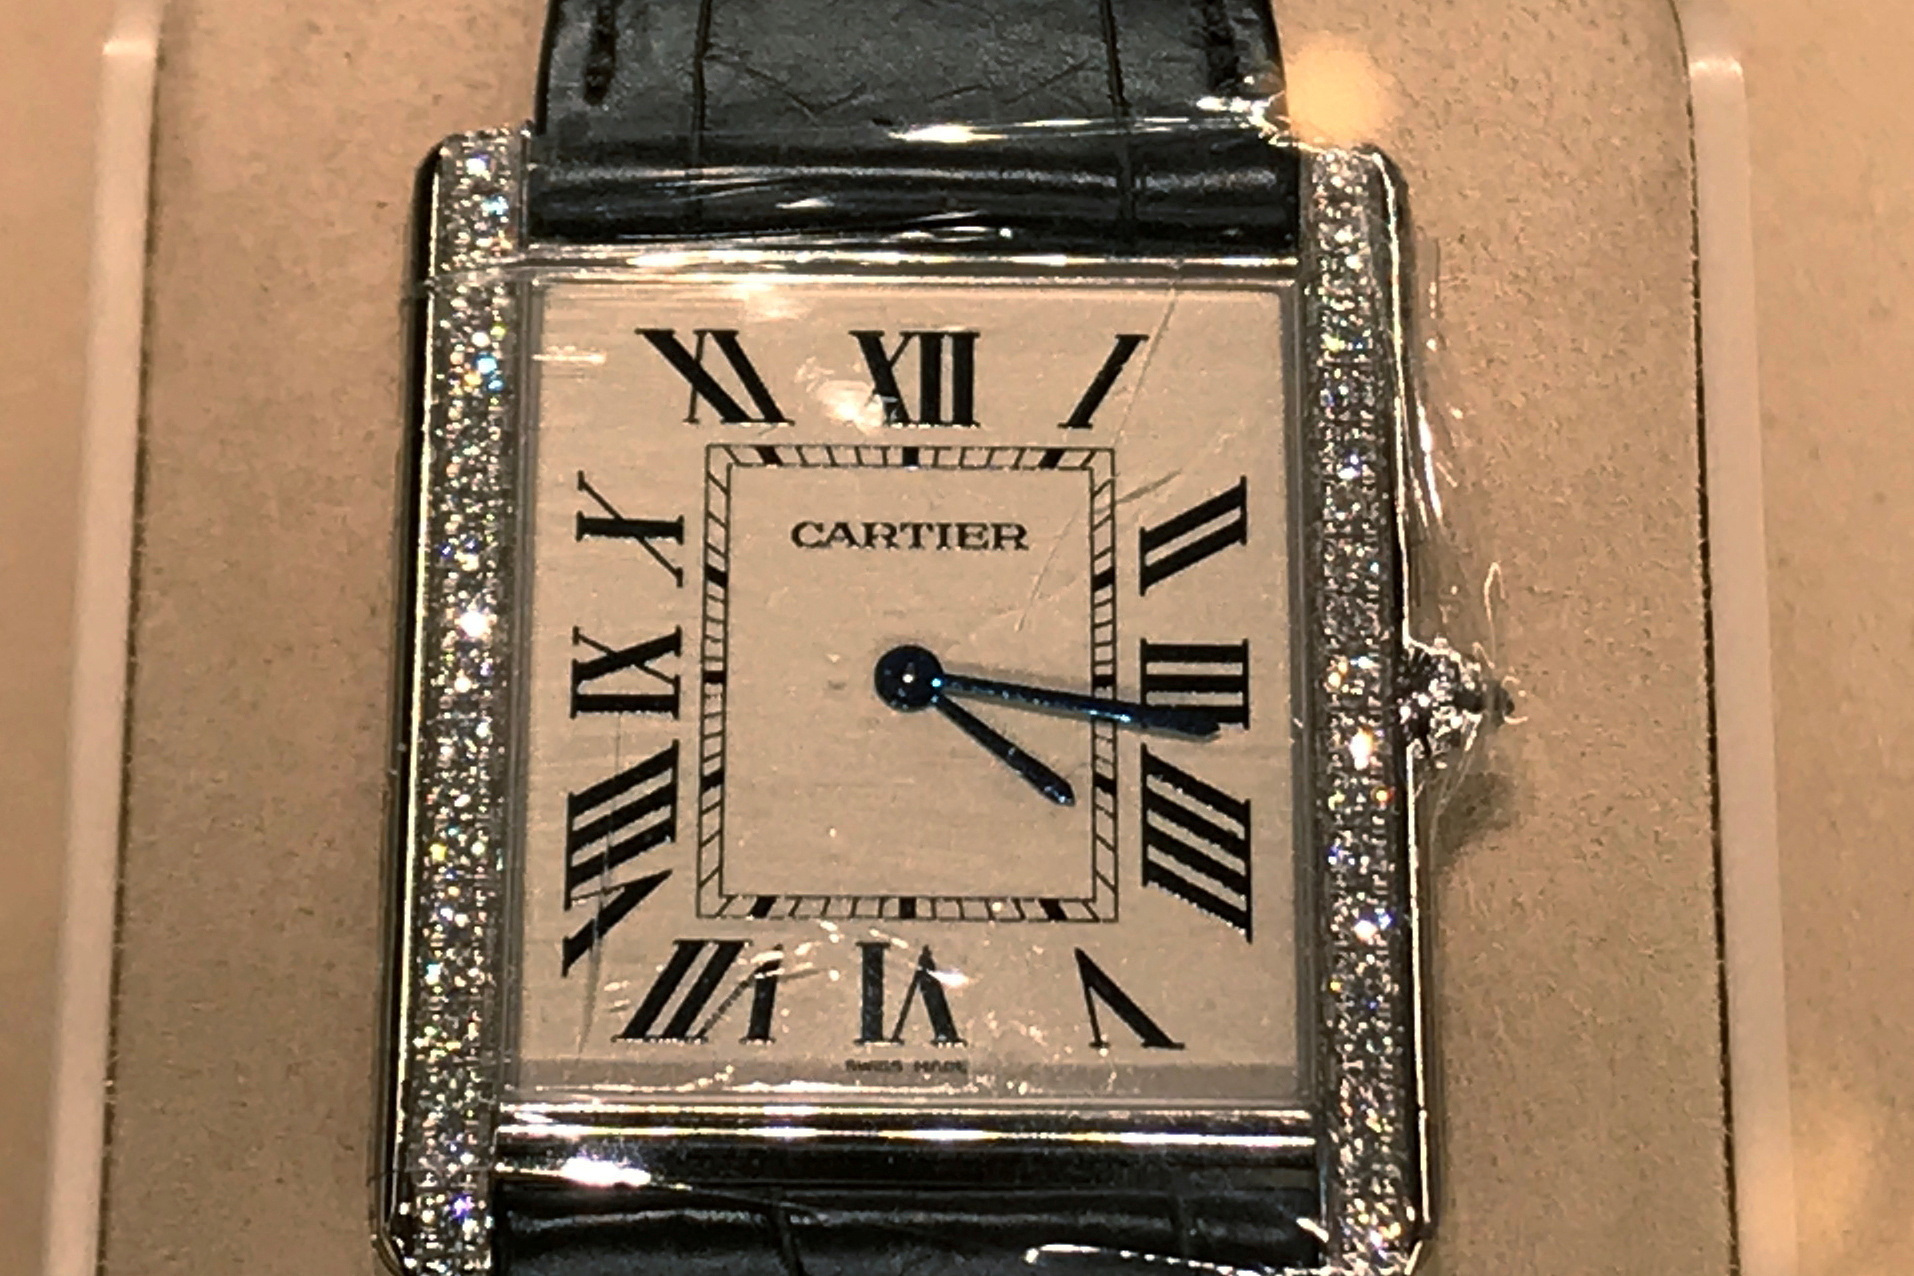 Items at the Cartier store are pictured in the Manhattan borough of New York City